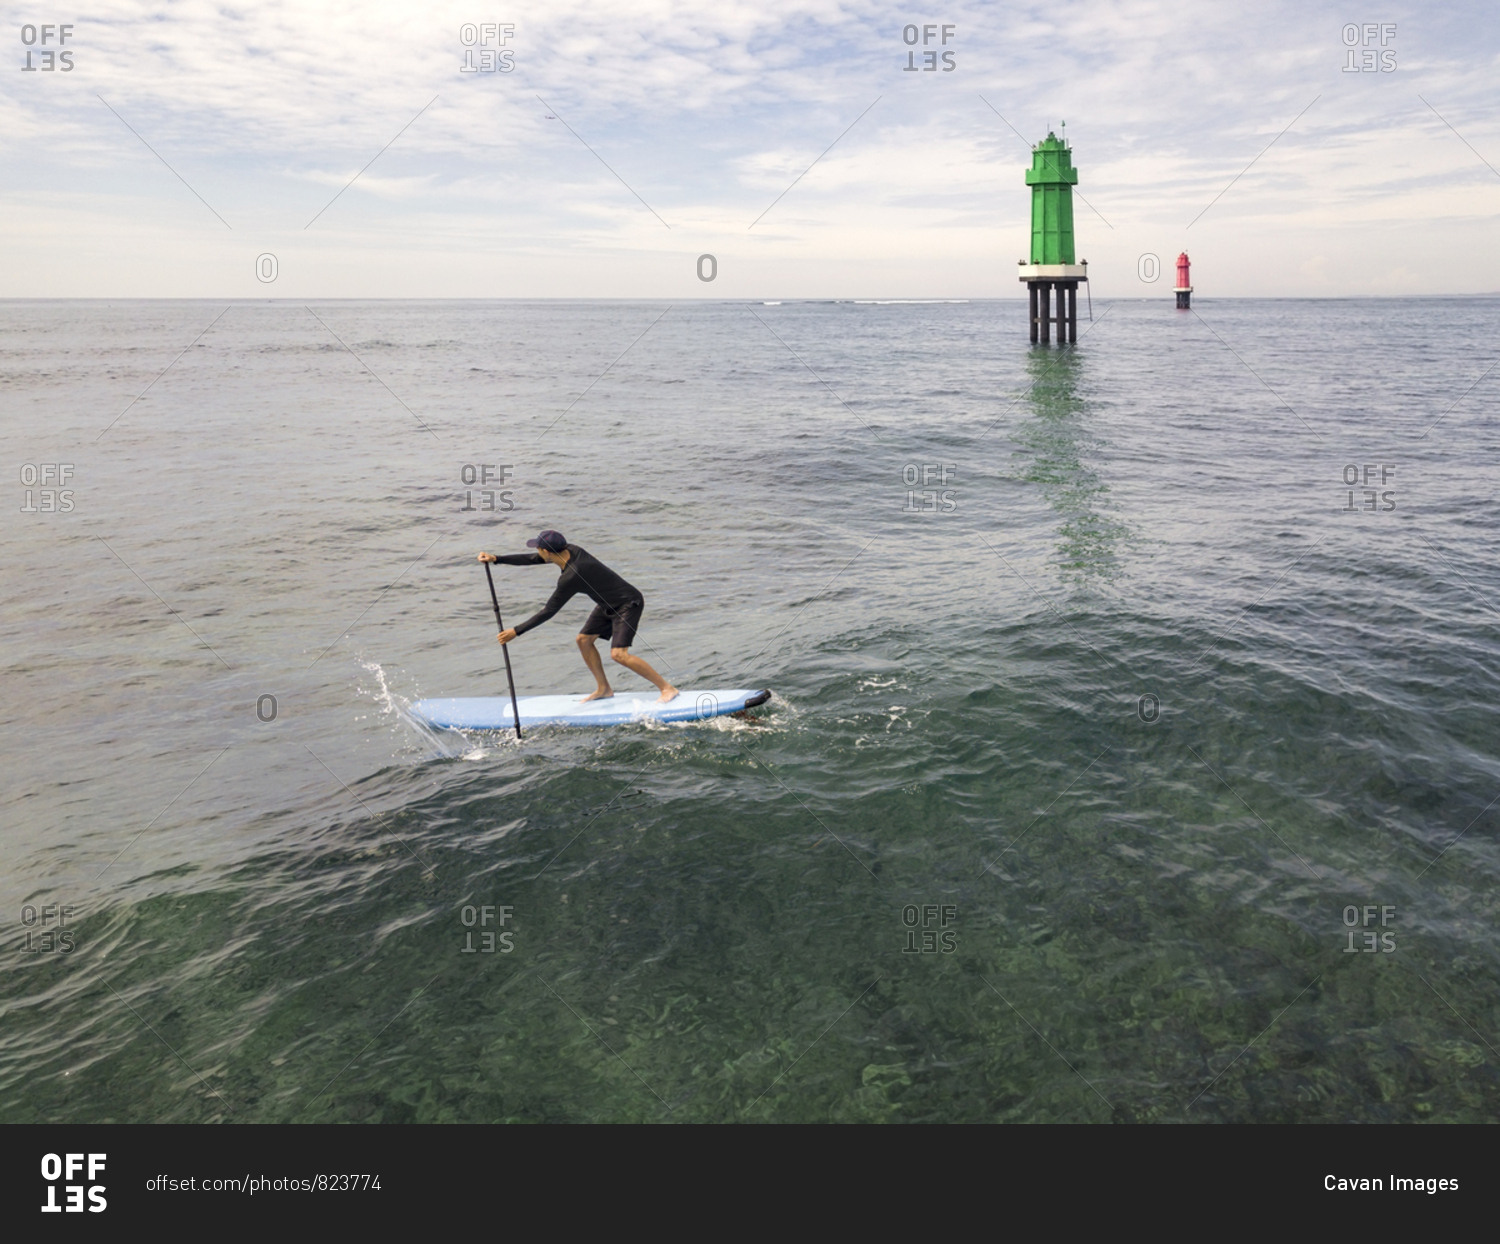 Aerial view of stand up paddle surfing